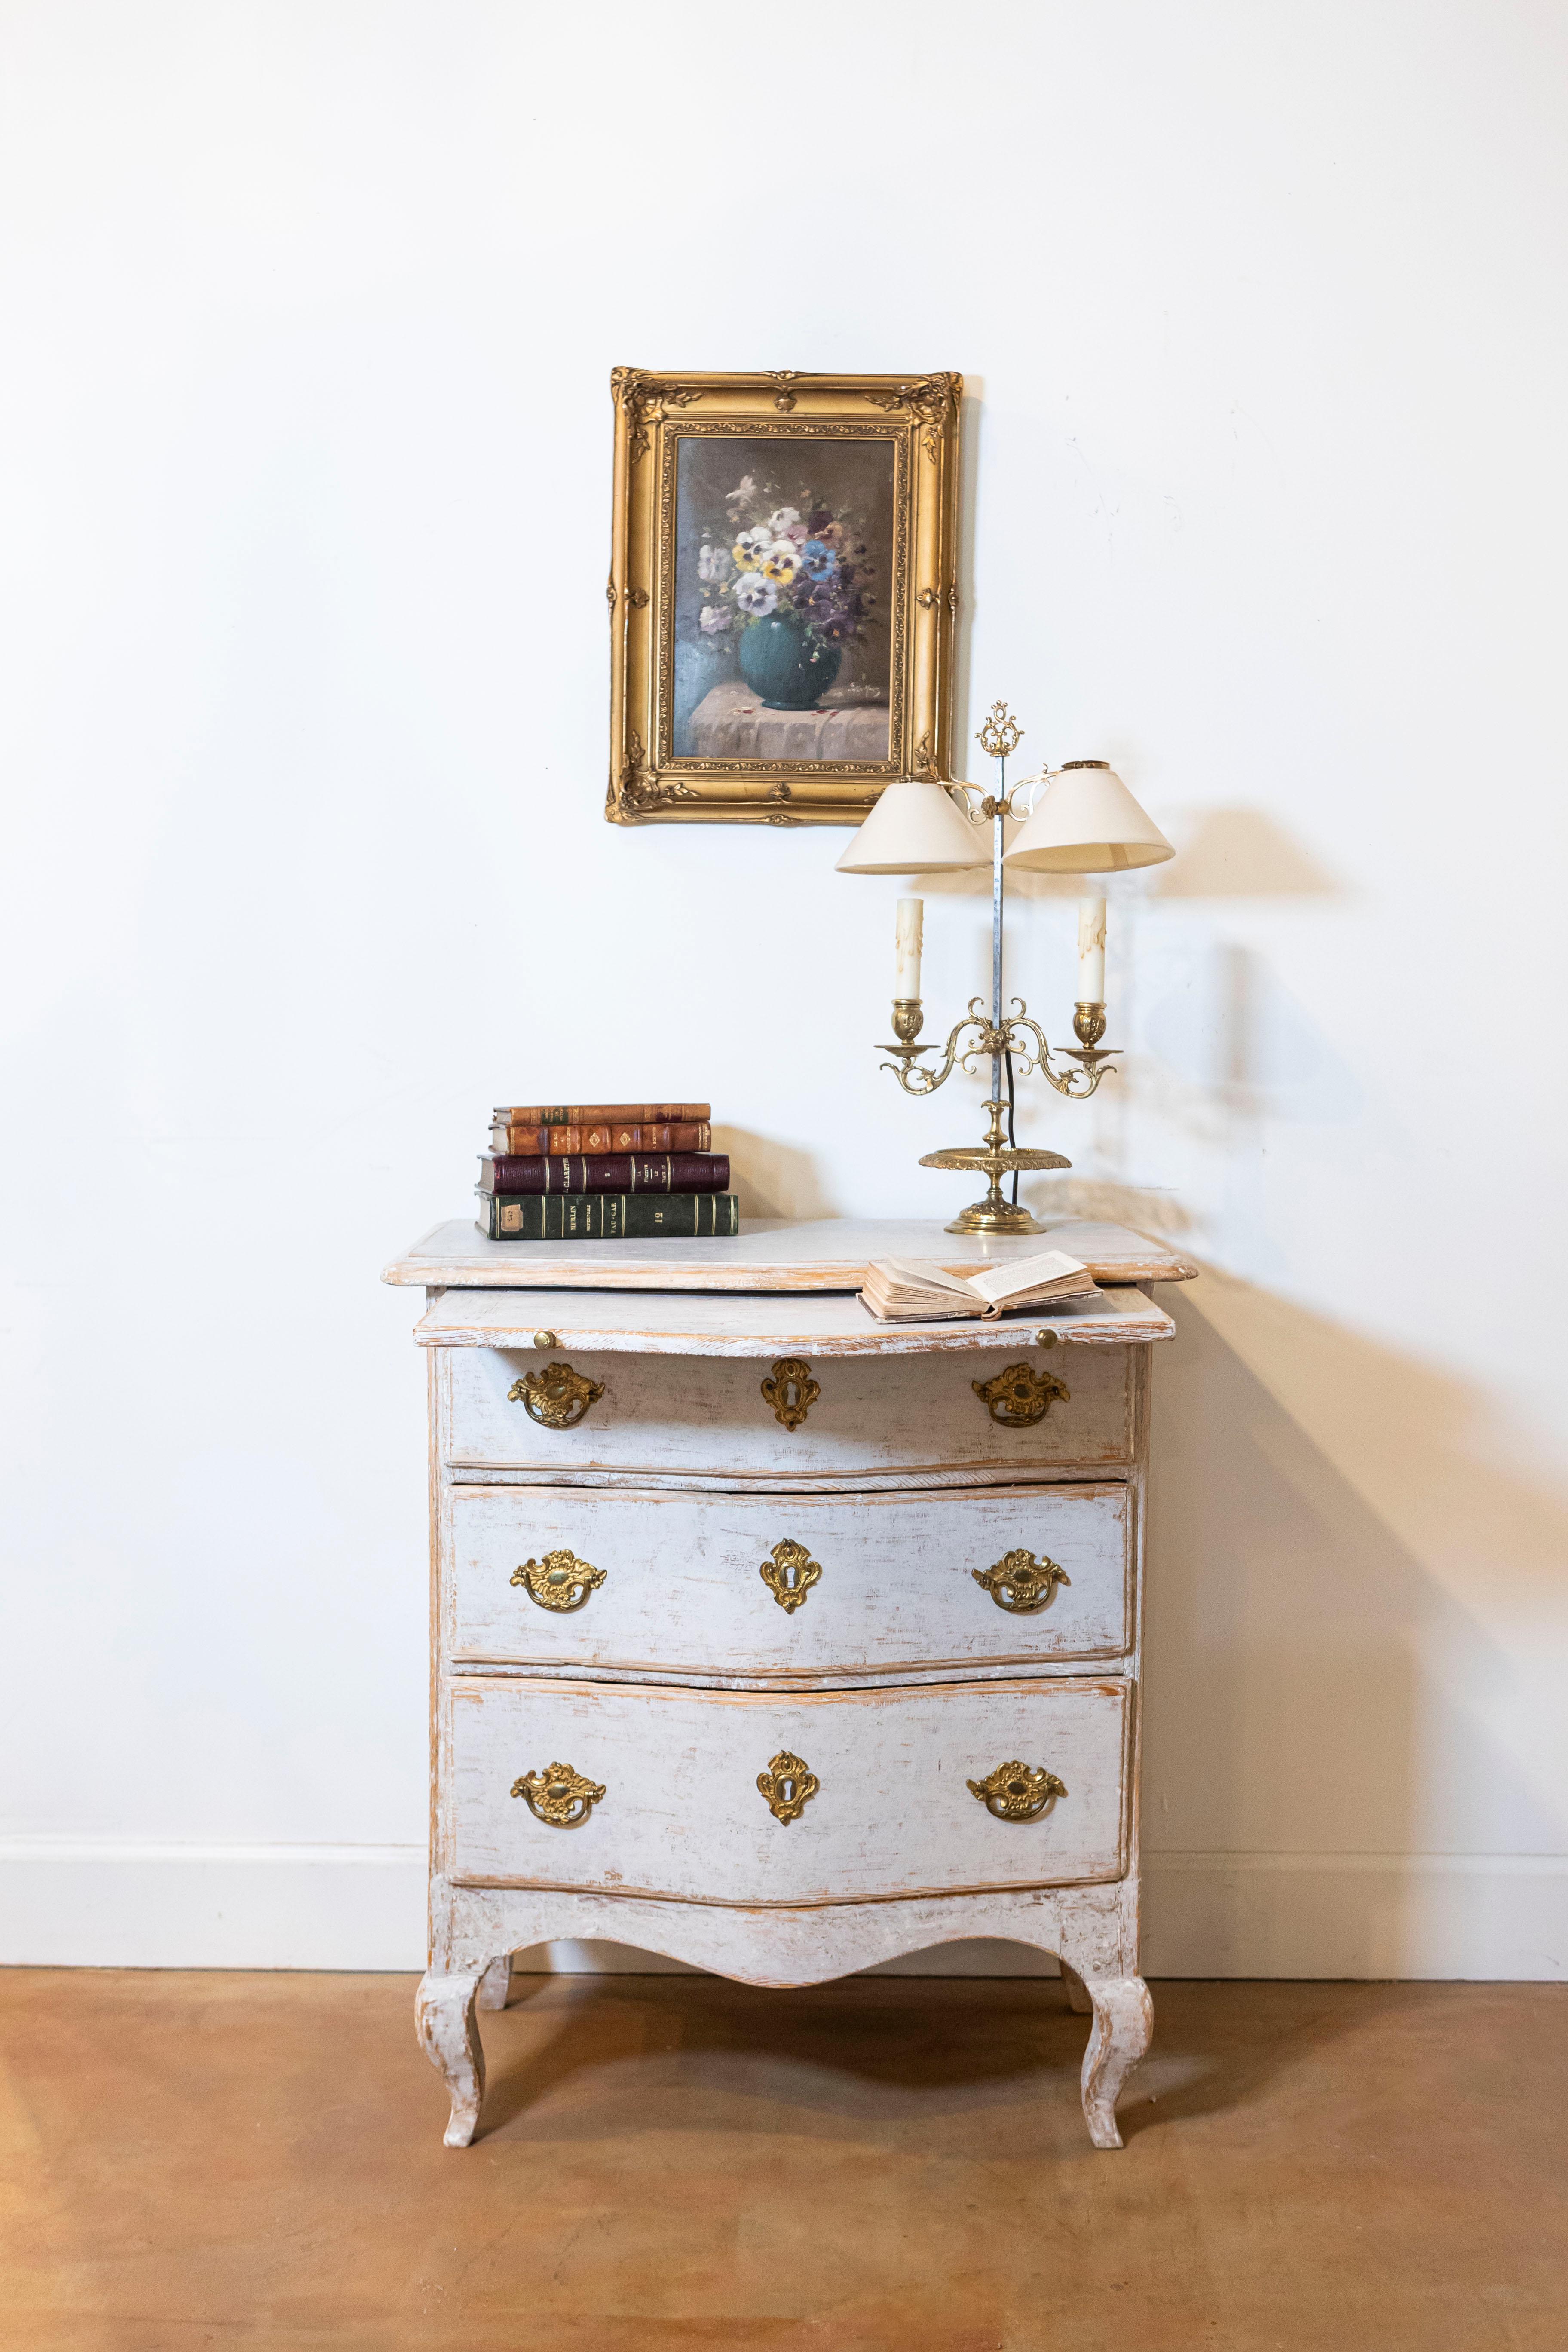 1760s Rococo Period Swedish Light Grey Painted Chest of Drawers with Pull-Out For Sale 2